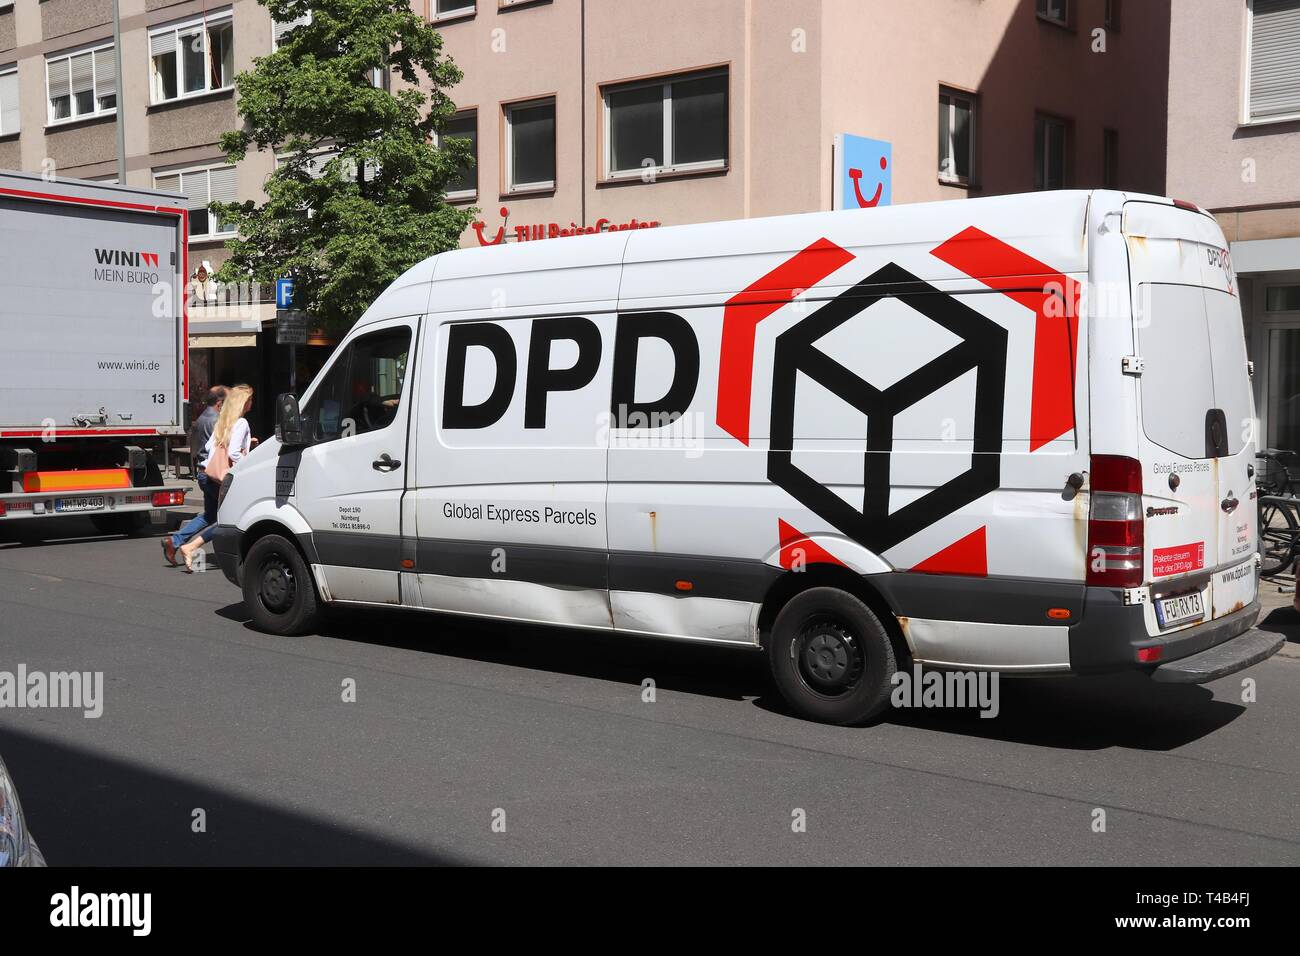 Page 5 - Dpd High Resolution Stock Photography and Images - Alamy